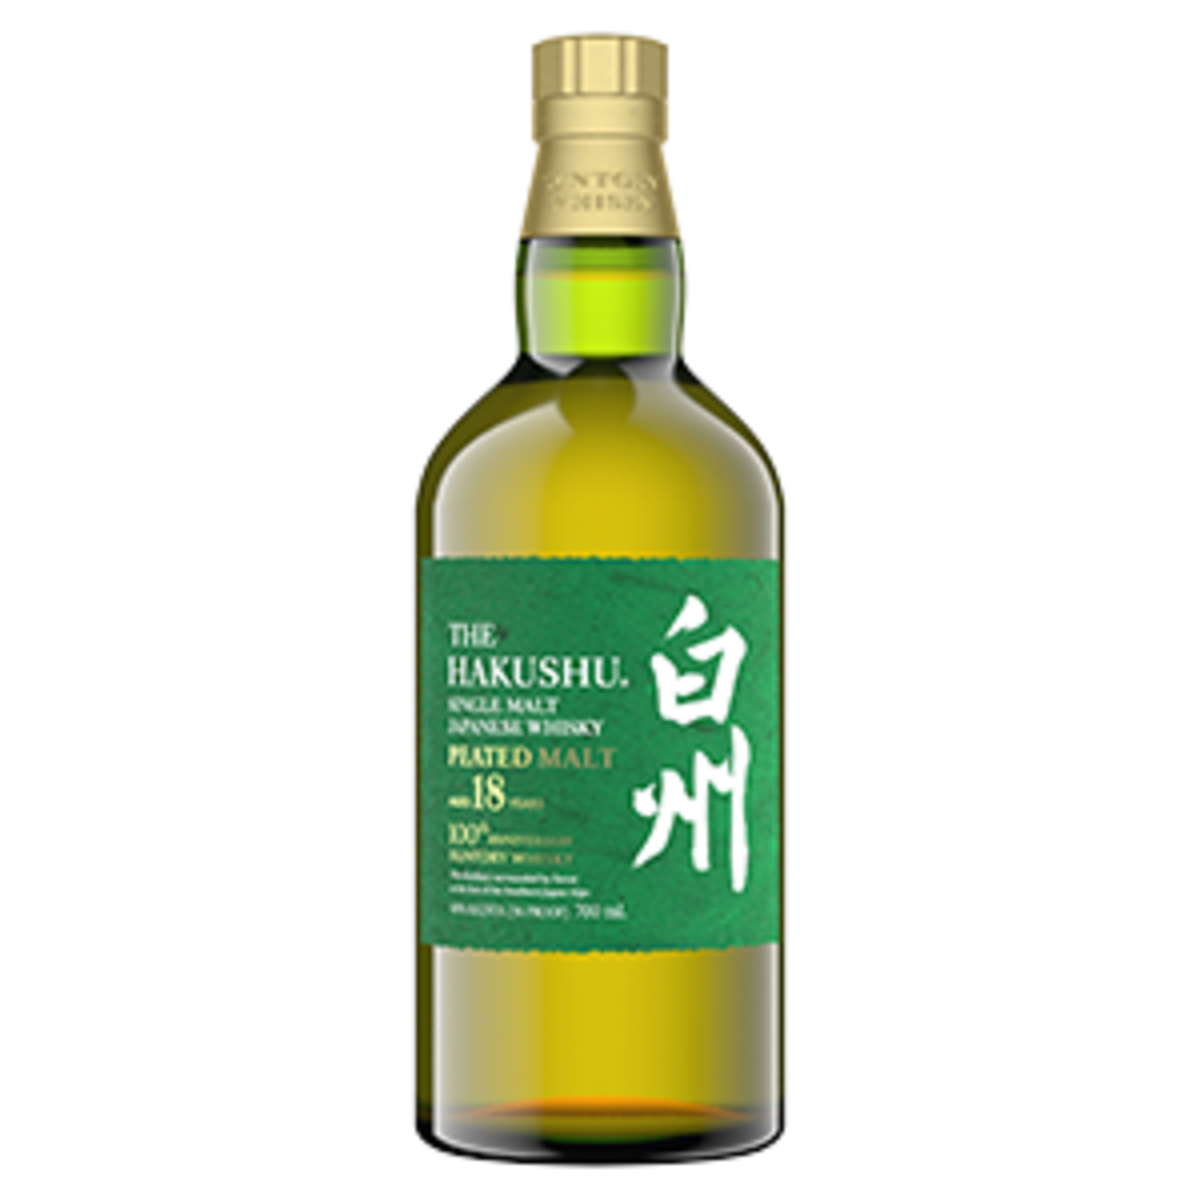 Hakushu 18 year old Peated Malt 100th Anniversary Limited Edition Review